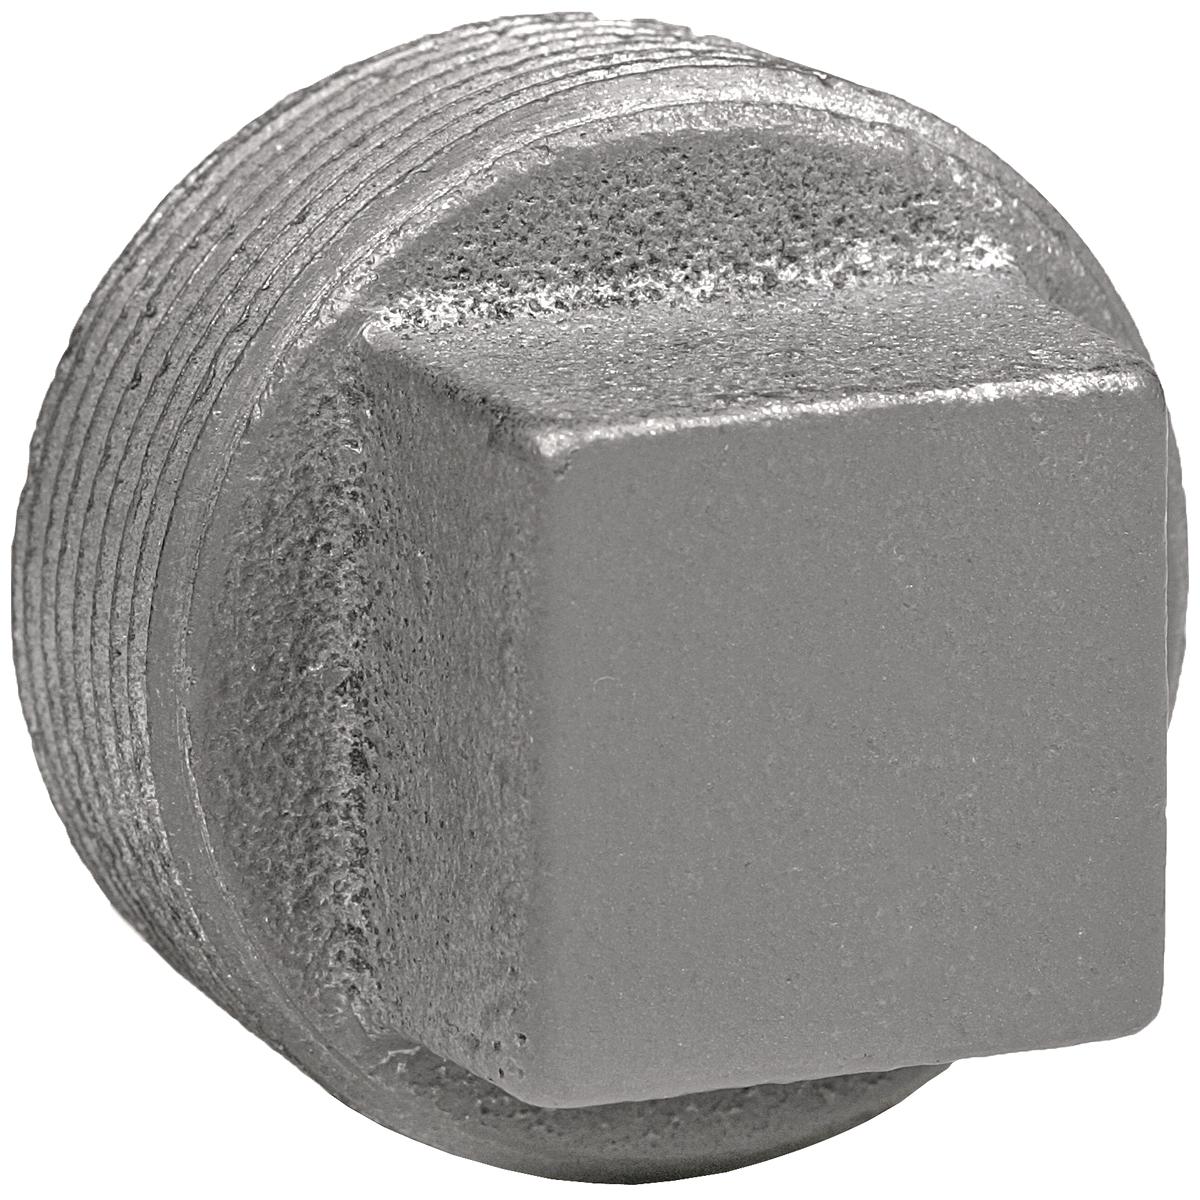 Hubbell PLUG2-SQ 3/4" Steel, (Zinc Plated) Threaded Insert Plug, Square Head  ; Threaded hubs (NPT) ; To close up a tapped hole or hub ; Threaded hubs (NPT).